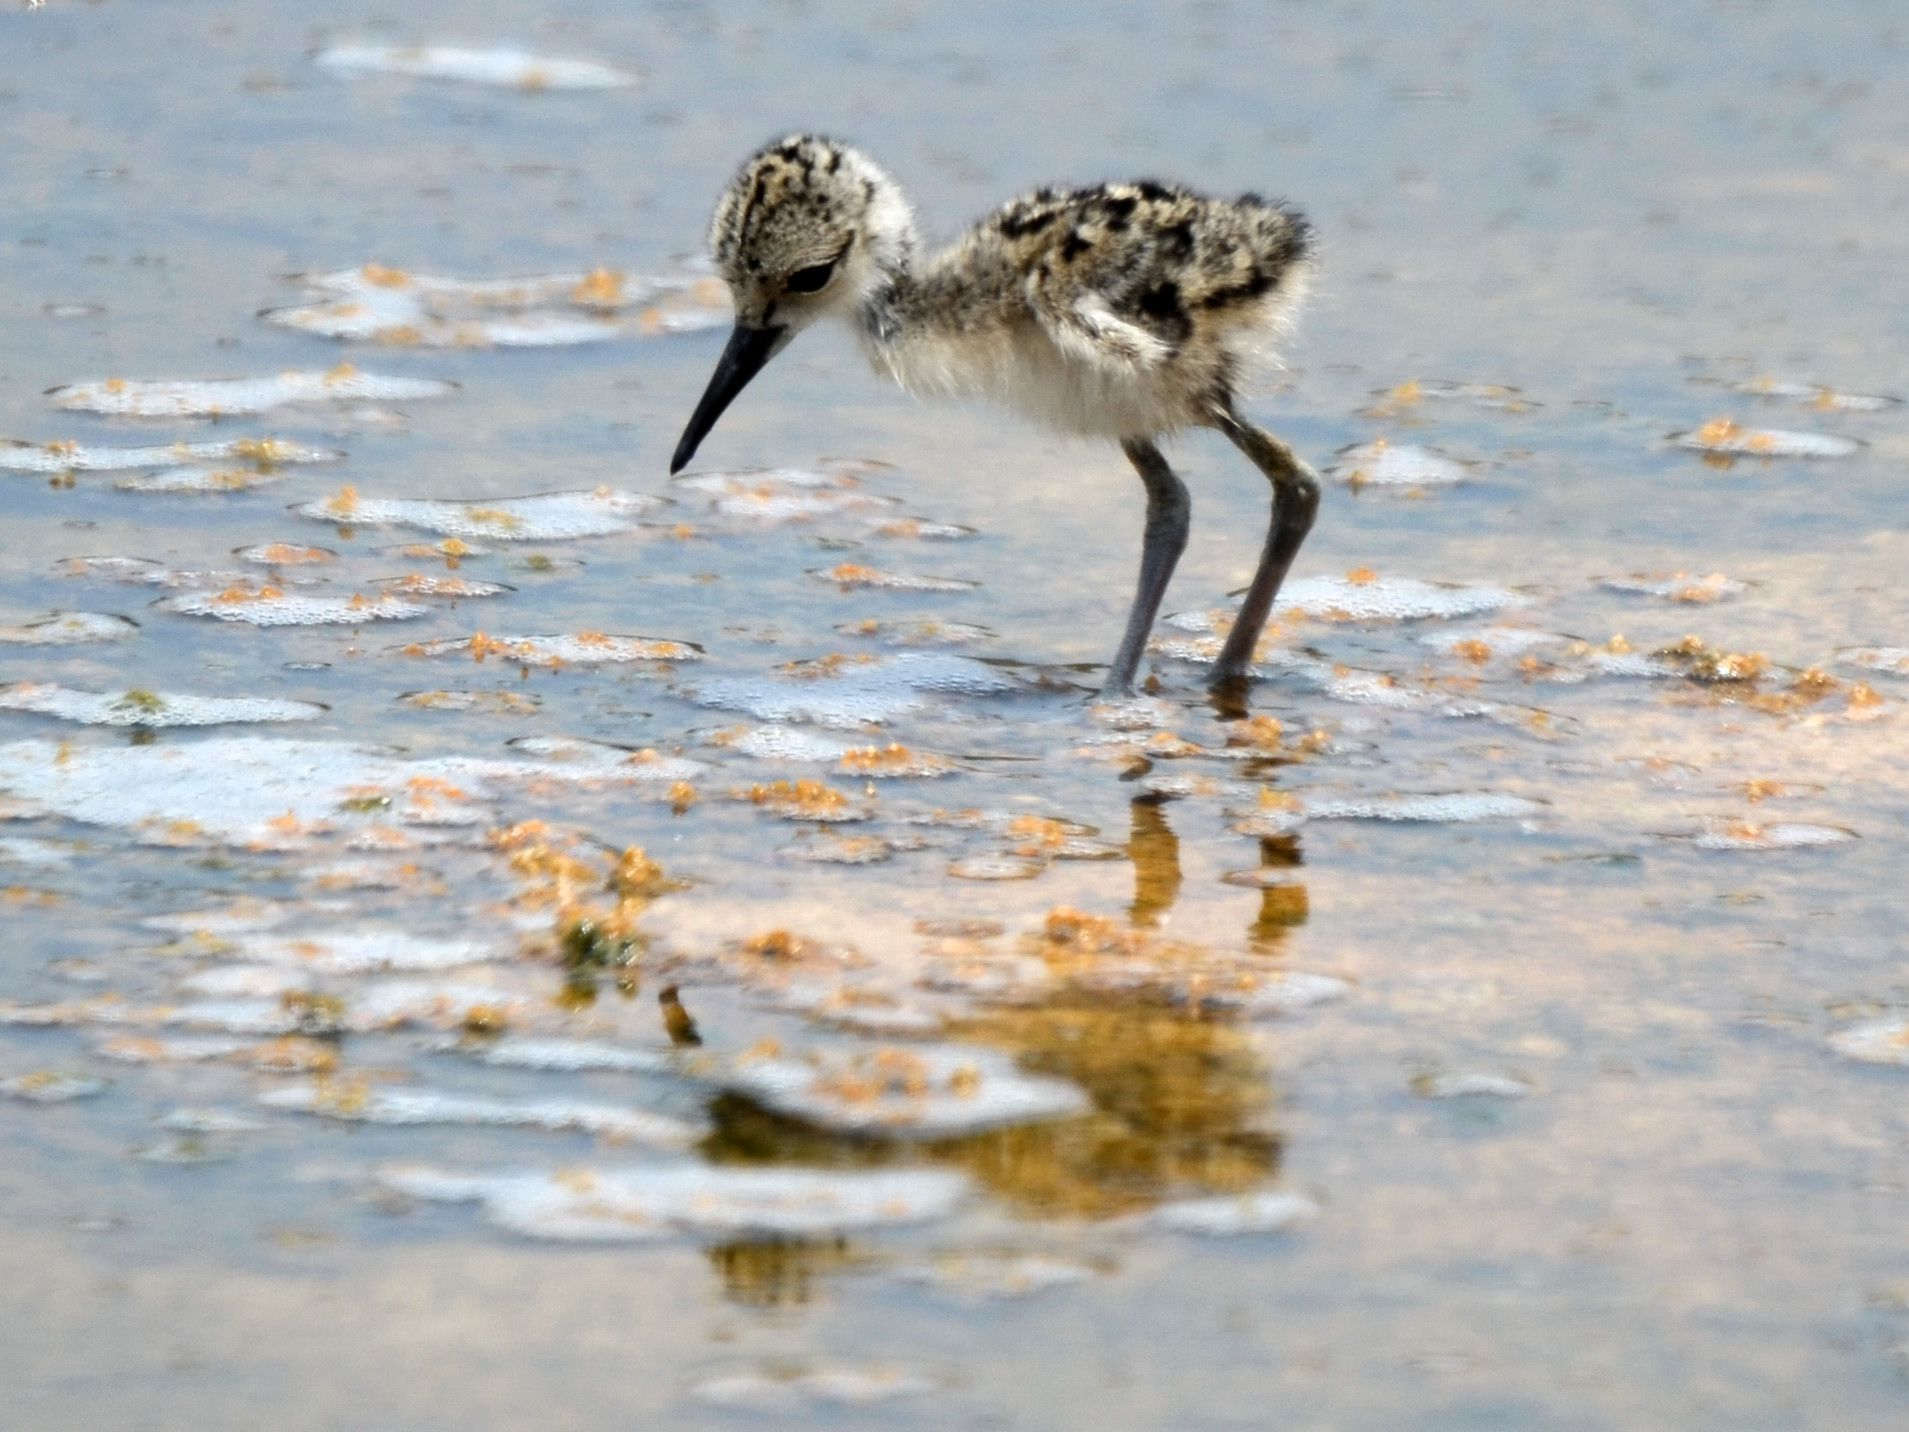 Click picture to see more Black-necked Stilts.